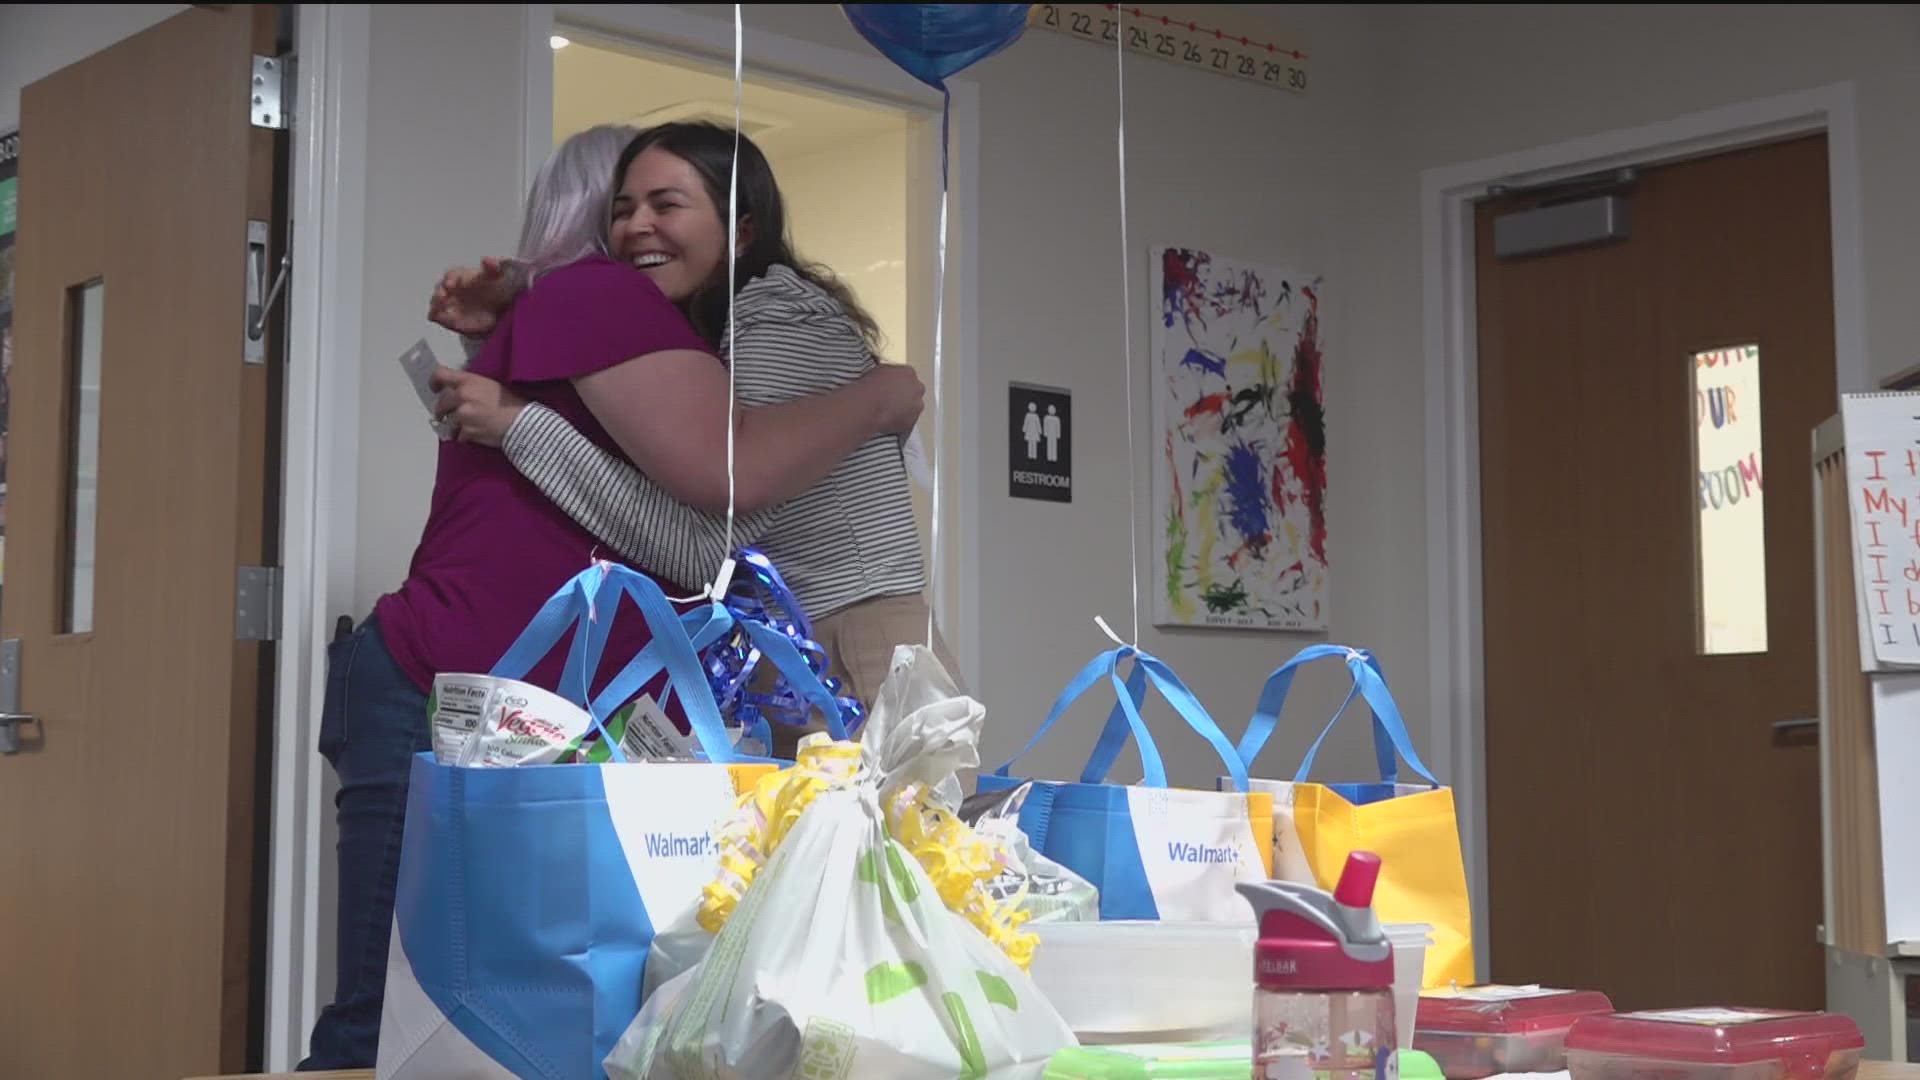 Many stores are offering savings for Teacher Appreciation Week. But for one local kindergarten teacher's, her discounts were brought right to her classroom.